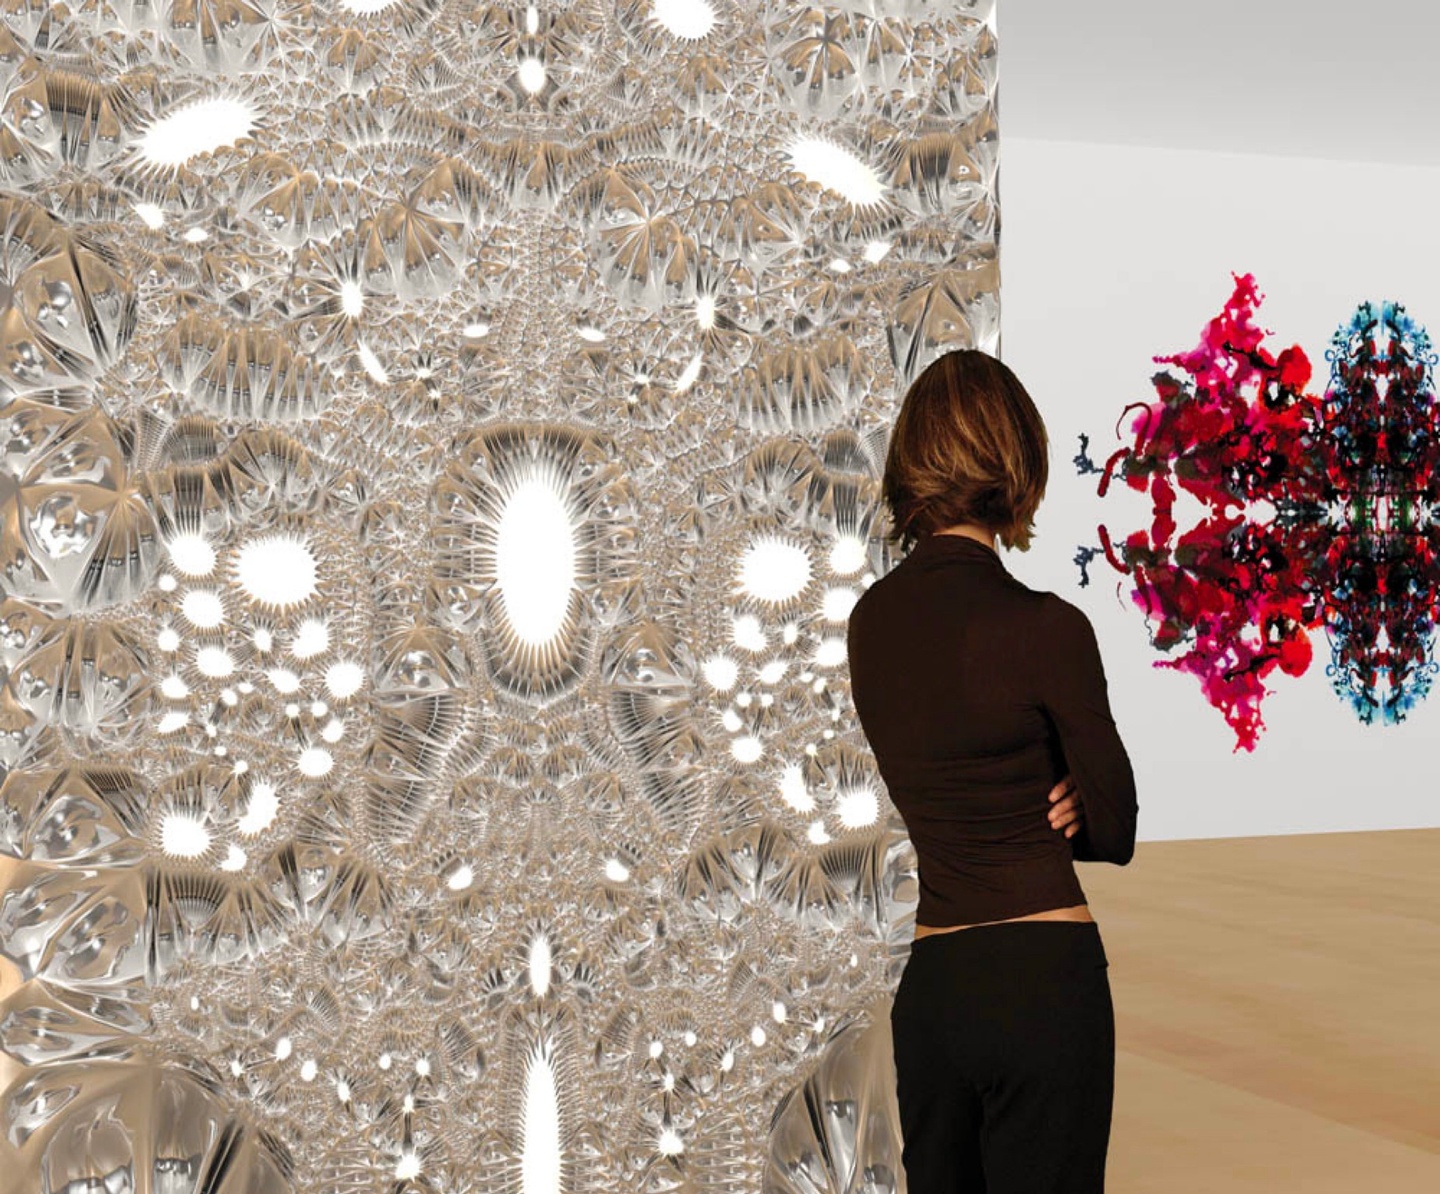 Installation of a large-scale, fabricated tesselation pattern in all white, with a person standing in front of it and artwork on the back gallery wall.